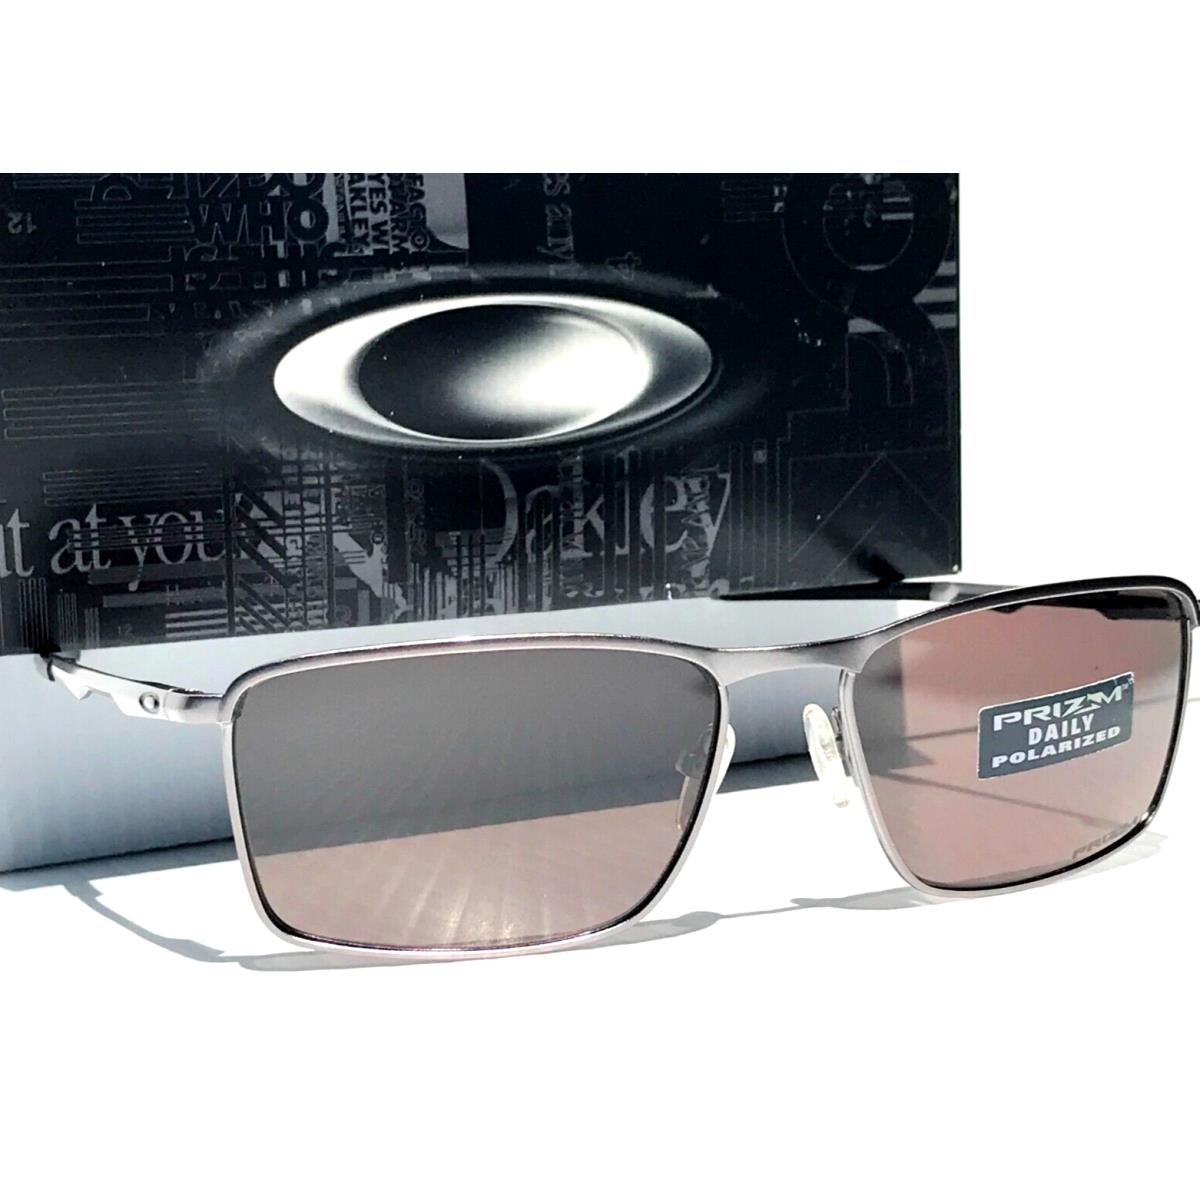 Oakley Conductor 6 Lead Silver Prizm Daily Polarized Lens Sunglass 4106-07 - Frame: Silver, Lens: Brown